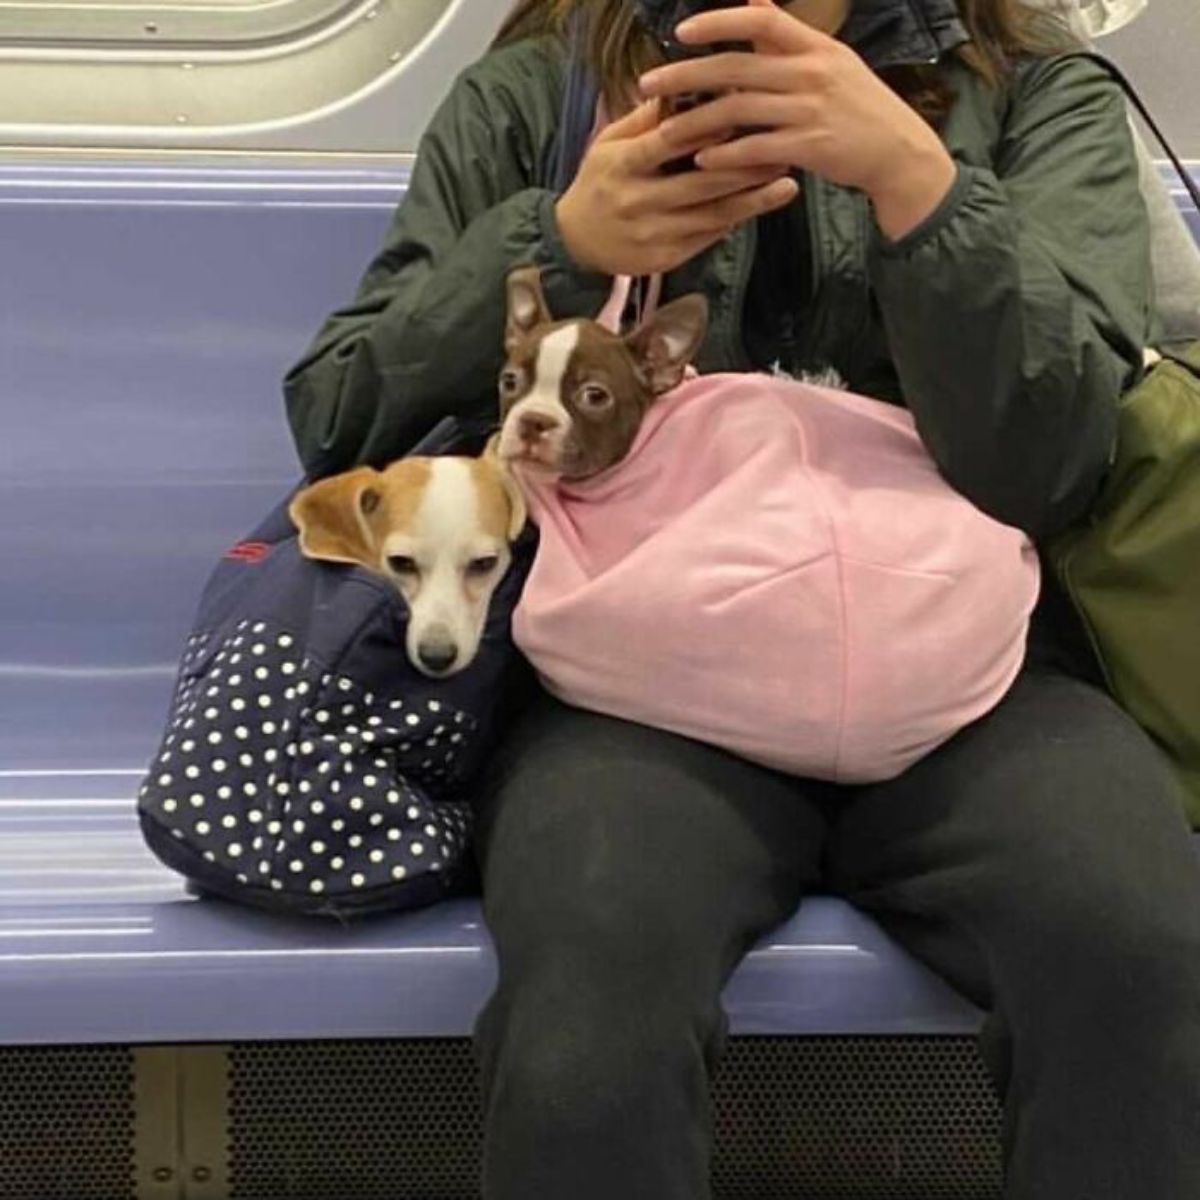 a light brown and white dog in a blue and white polka dotted bag and a dark brown and white dog in a pink bag with their heads sticking out